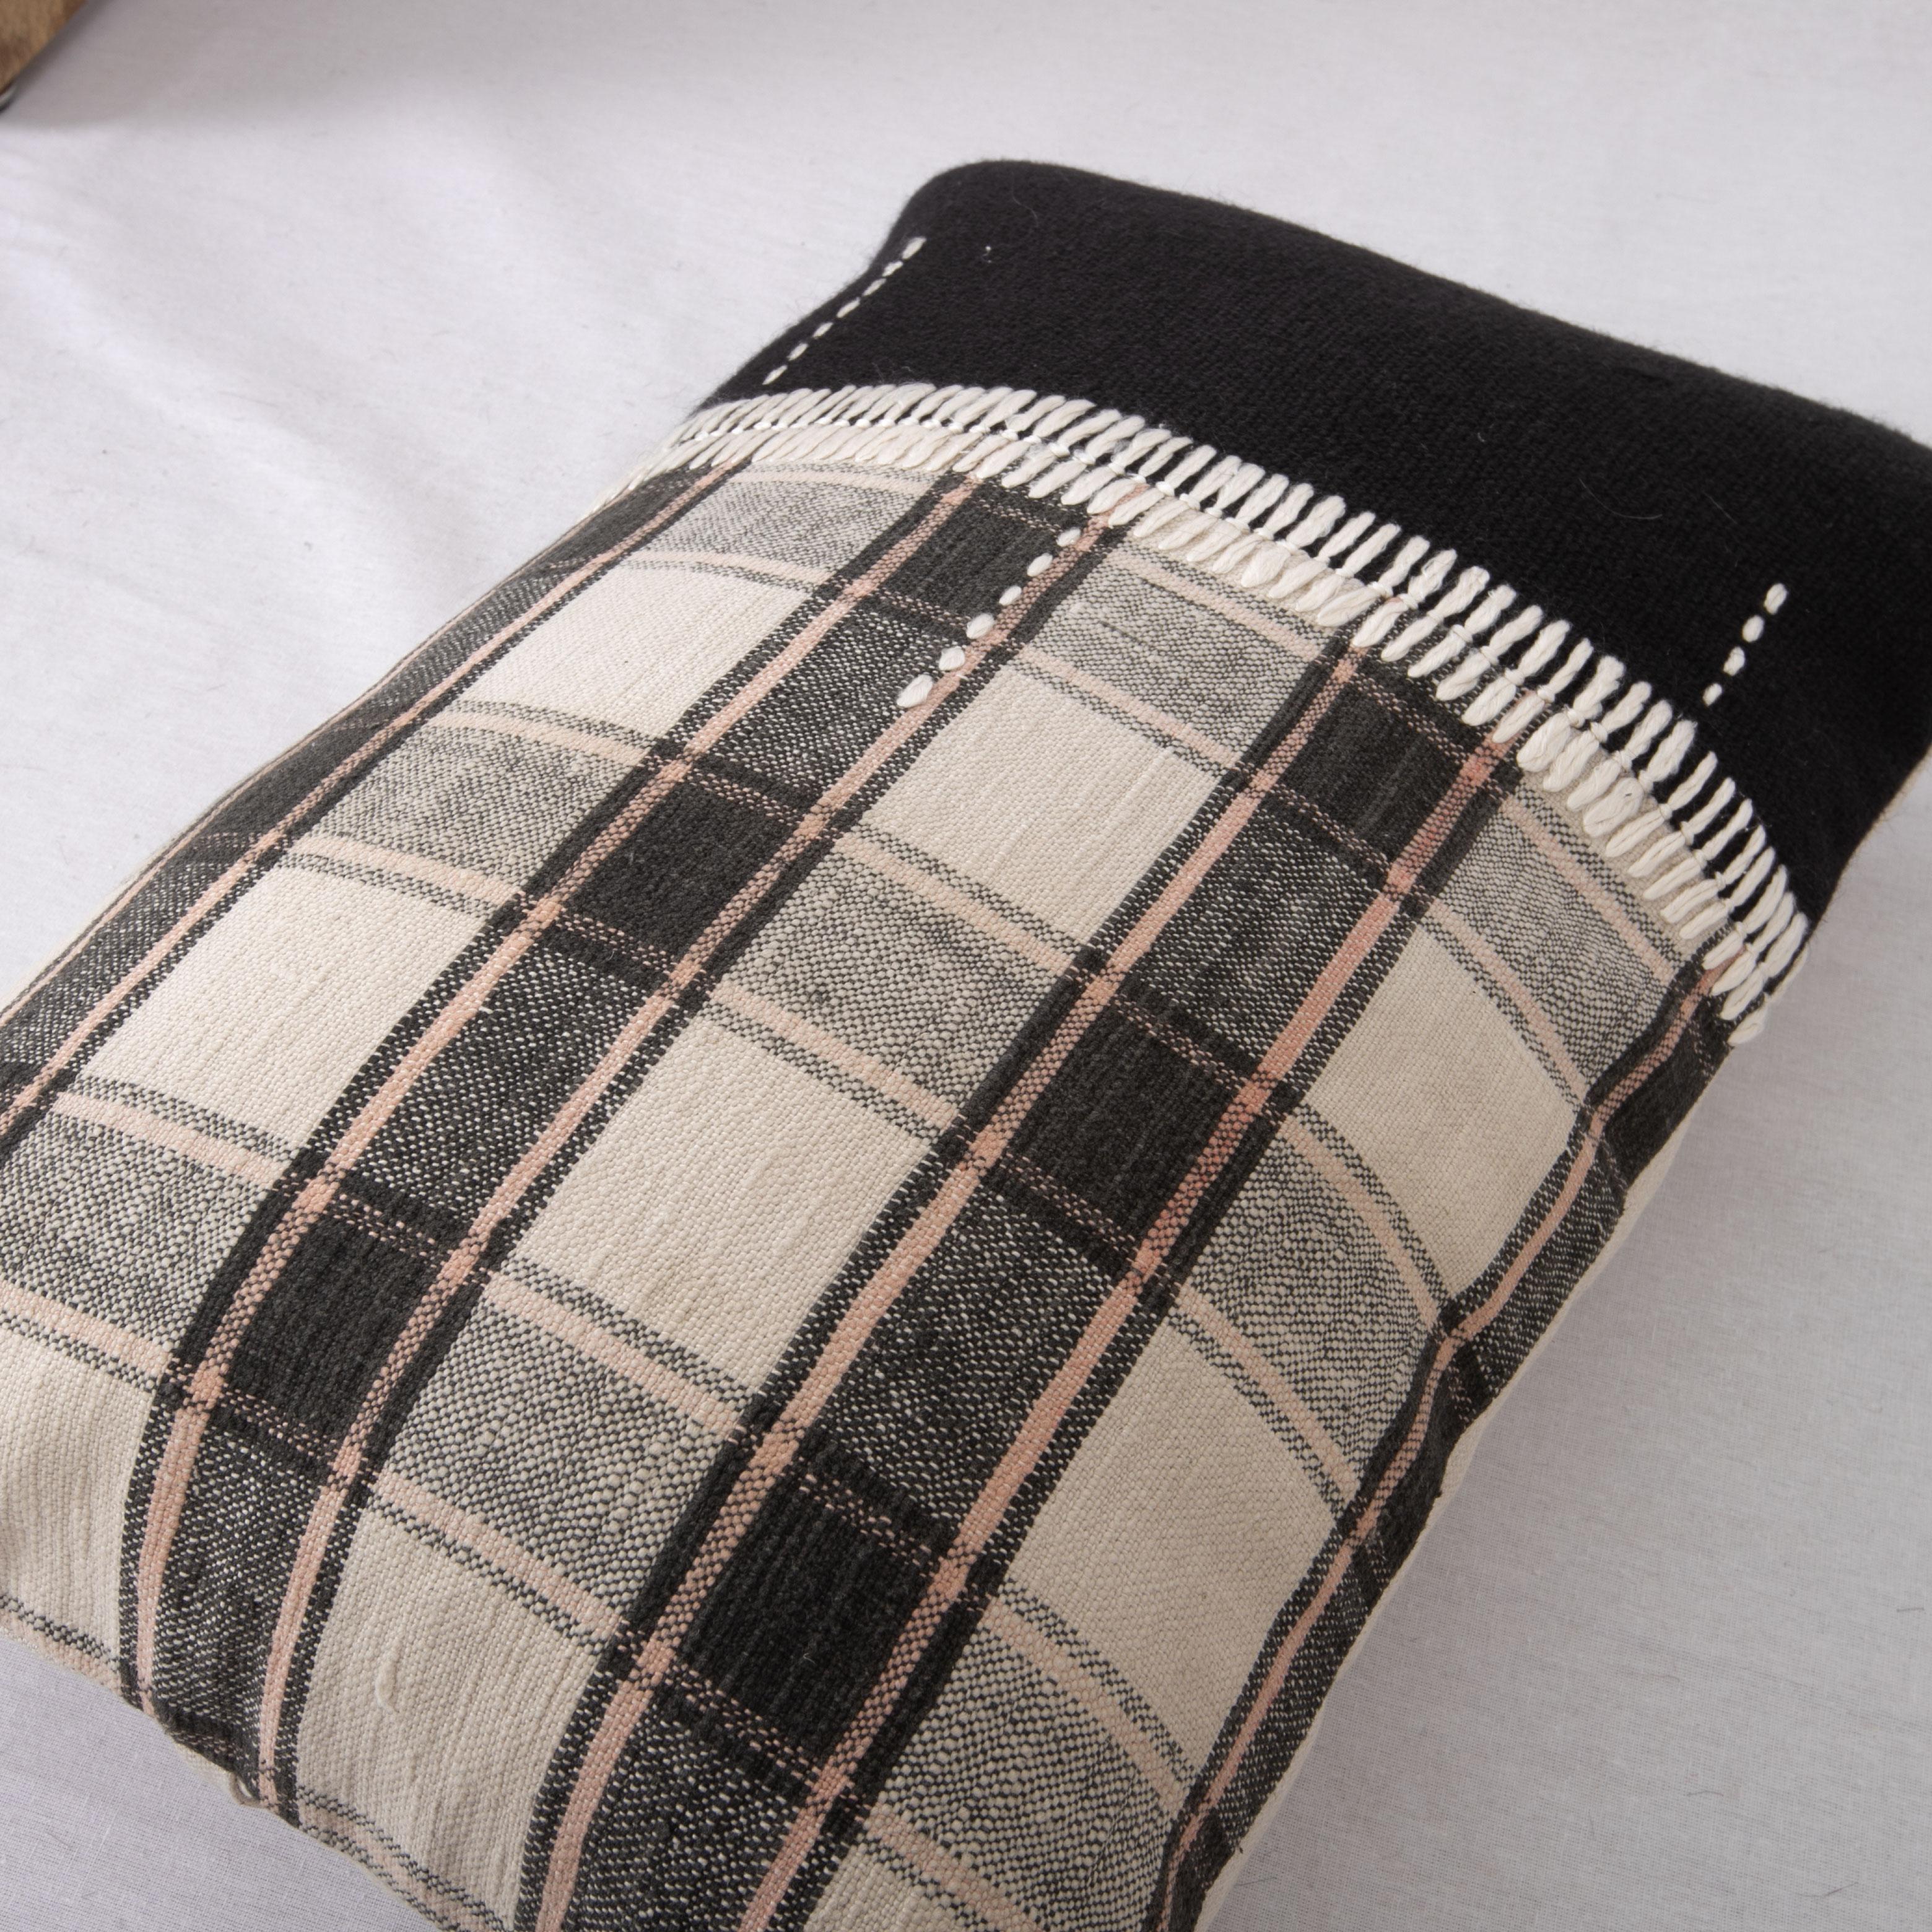 Hand-Woven Pillow case made from Anatolian Vintage Textiles For Sale